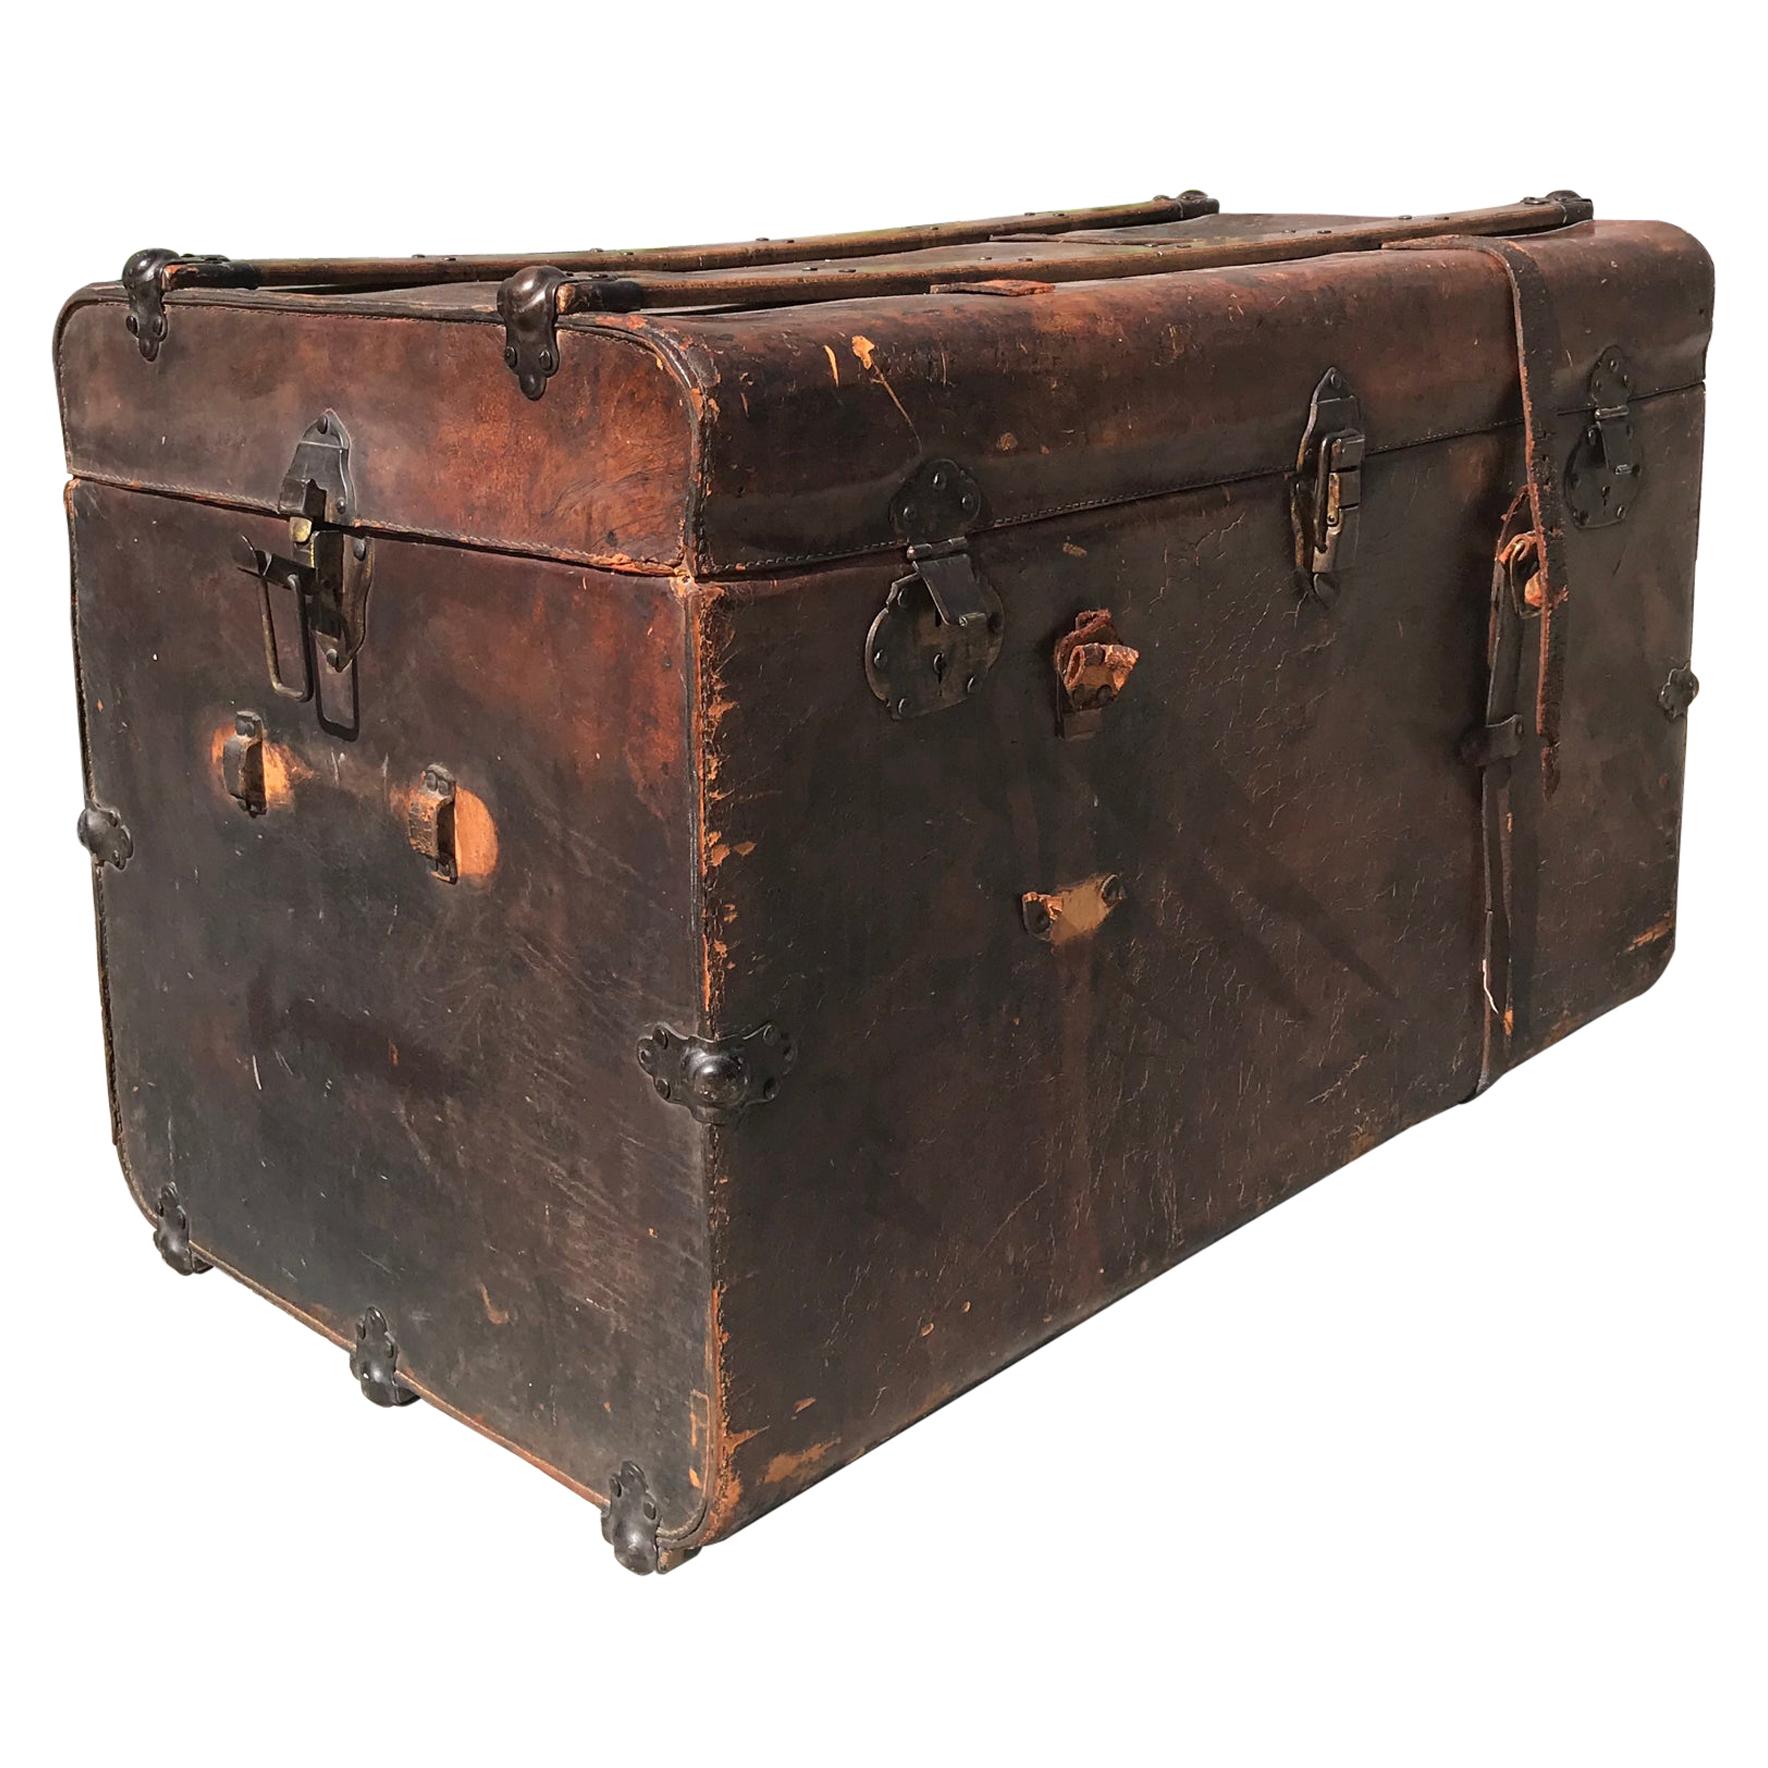 1890s Elegantly Distressed Antique Steamer Travel Trunk Aged Leather Wood & Iron